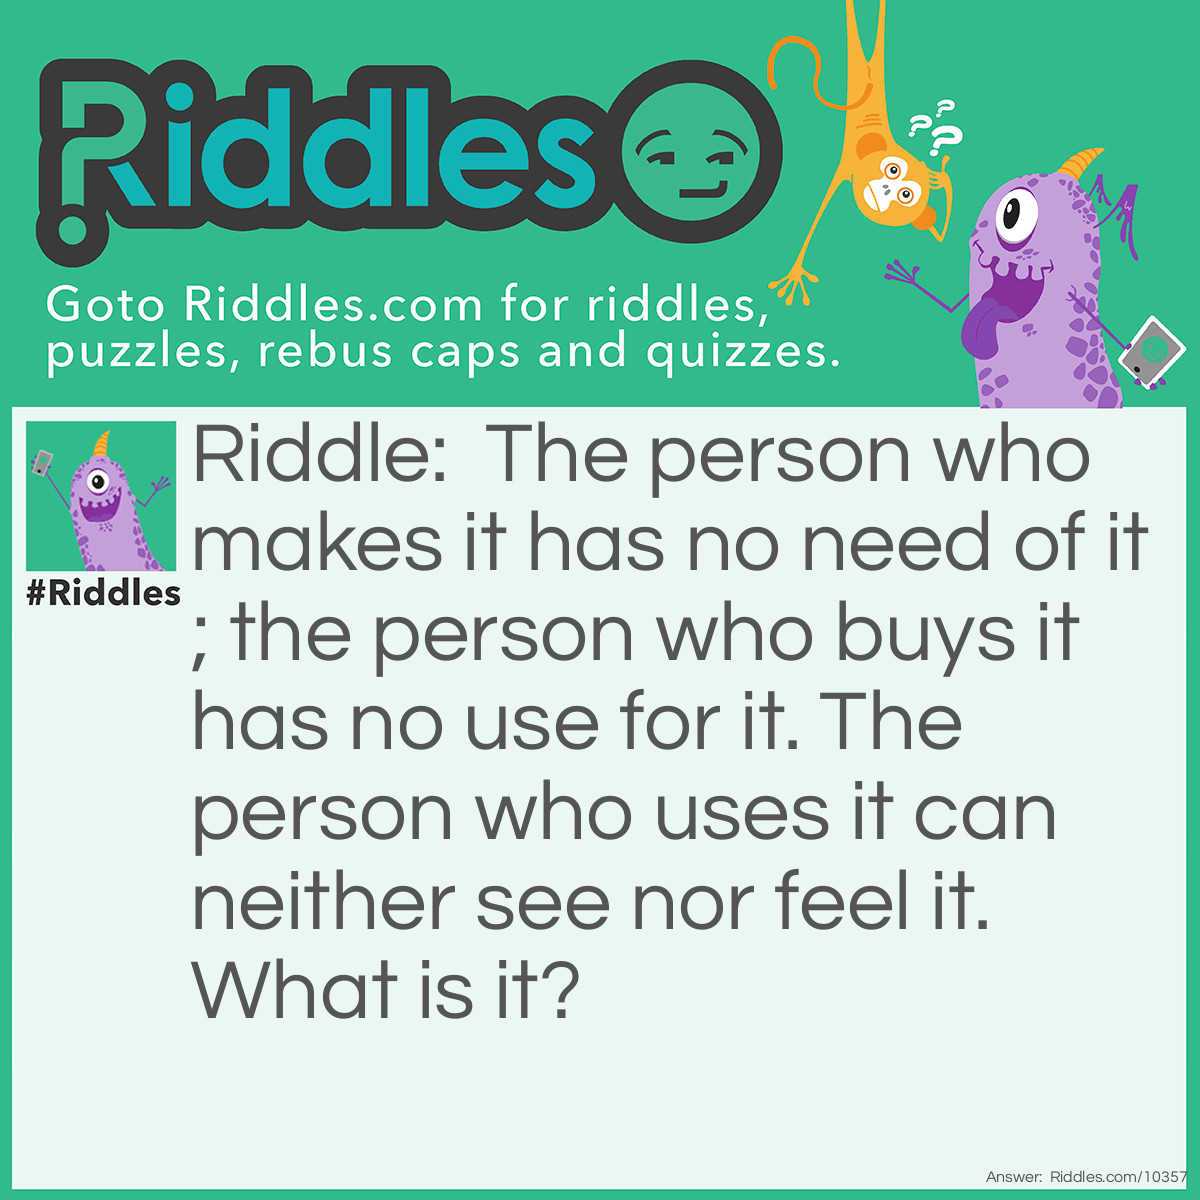 Riddle: The person who makes it has no need of it; the person who buys it has no use for it. The person who uses it can neither see nor feel it. What is it? Answer: A coffin.